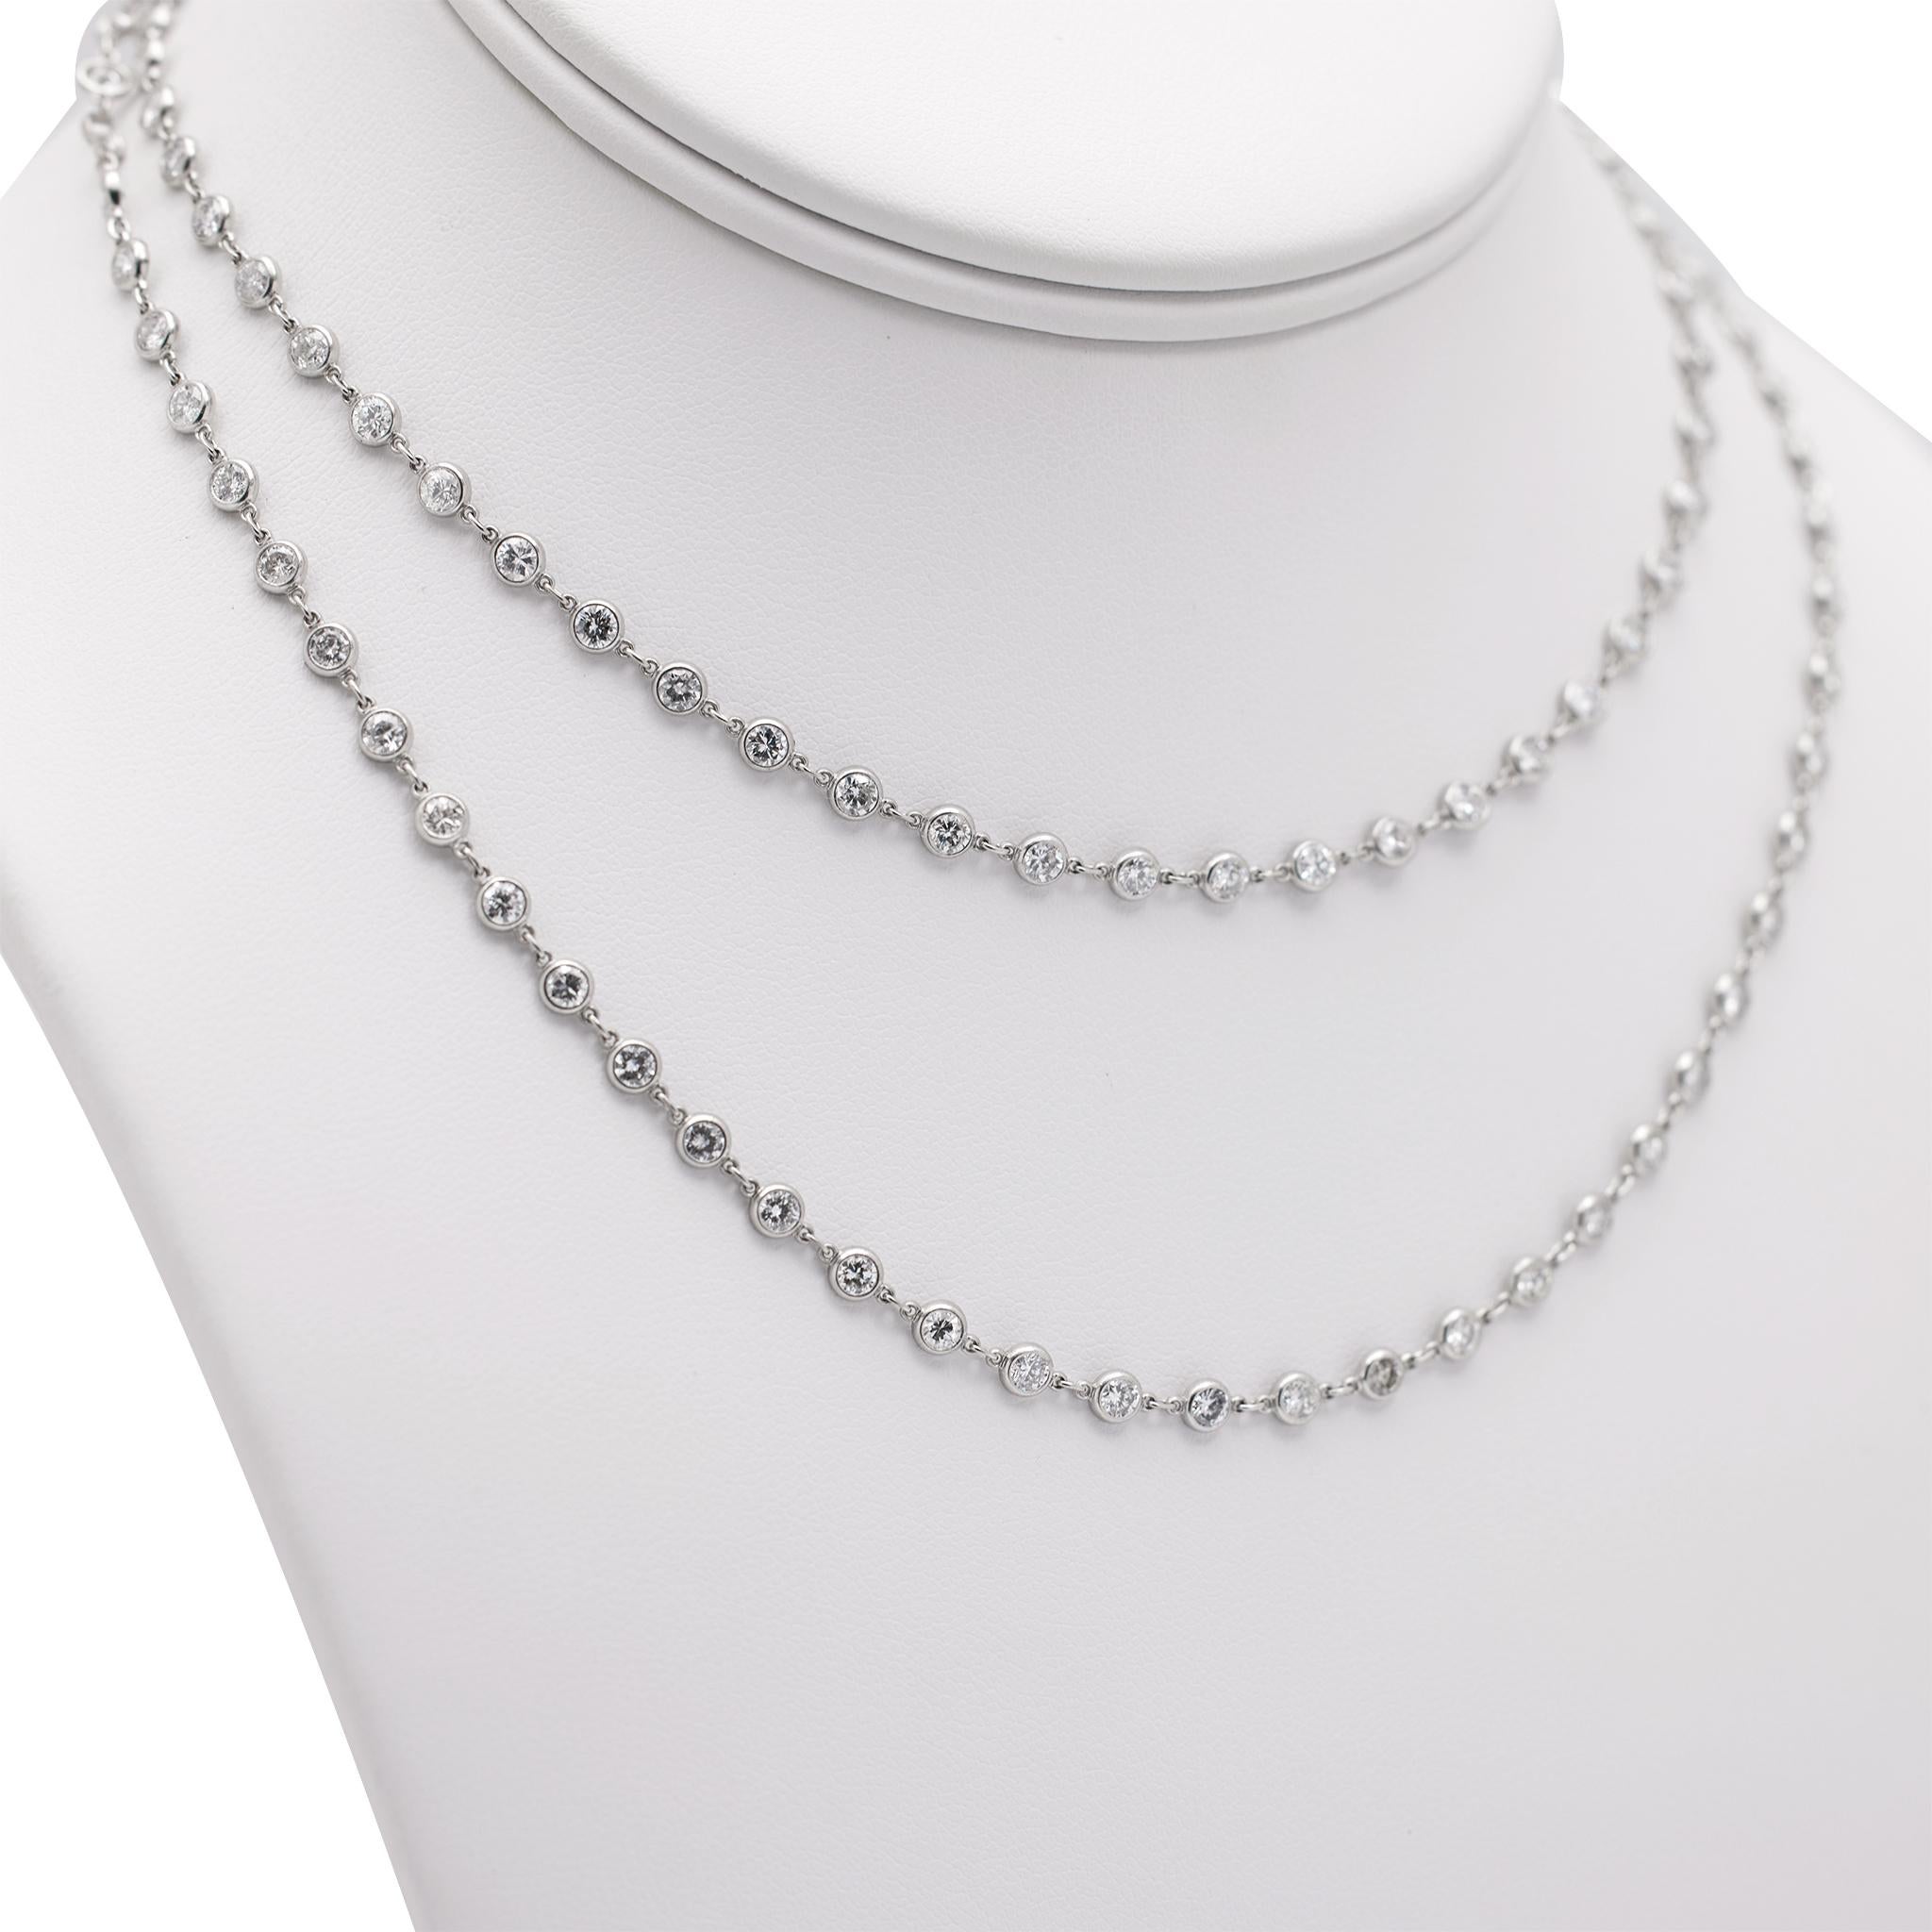 Women's or Men's Vintage Platinum Diamond by the Yard Chain Necklace